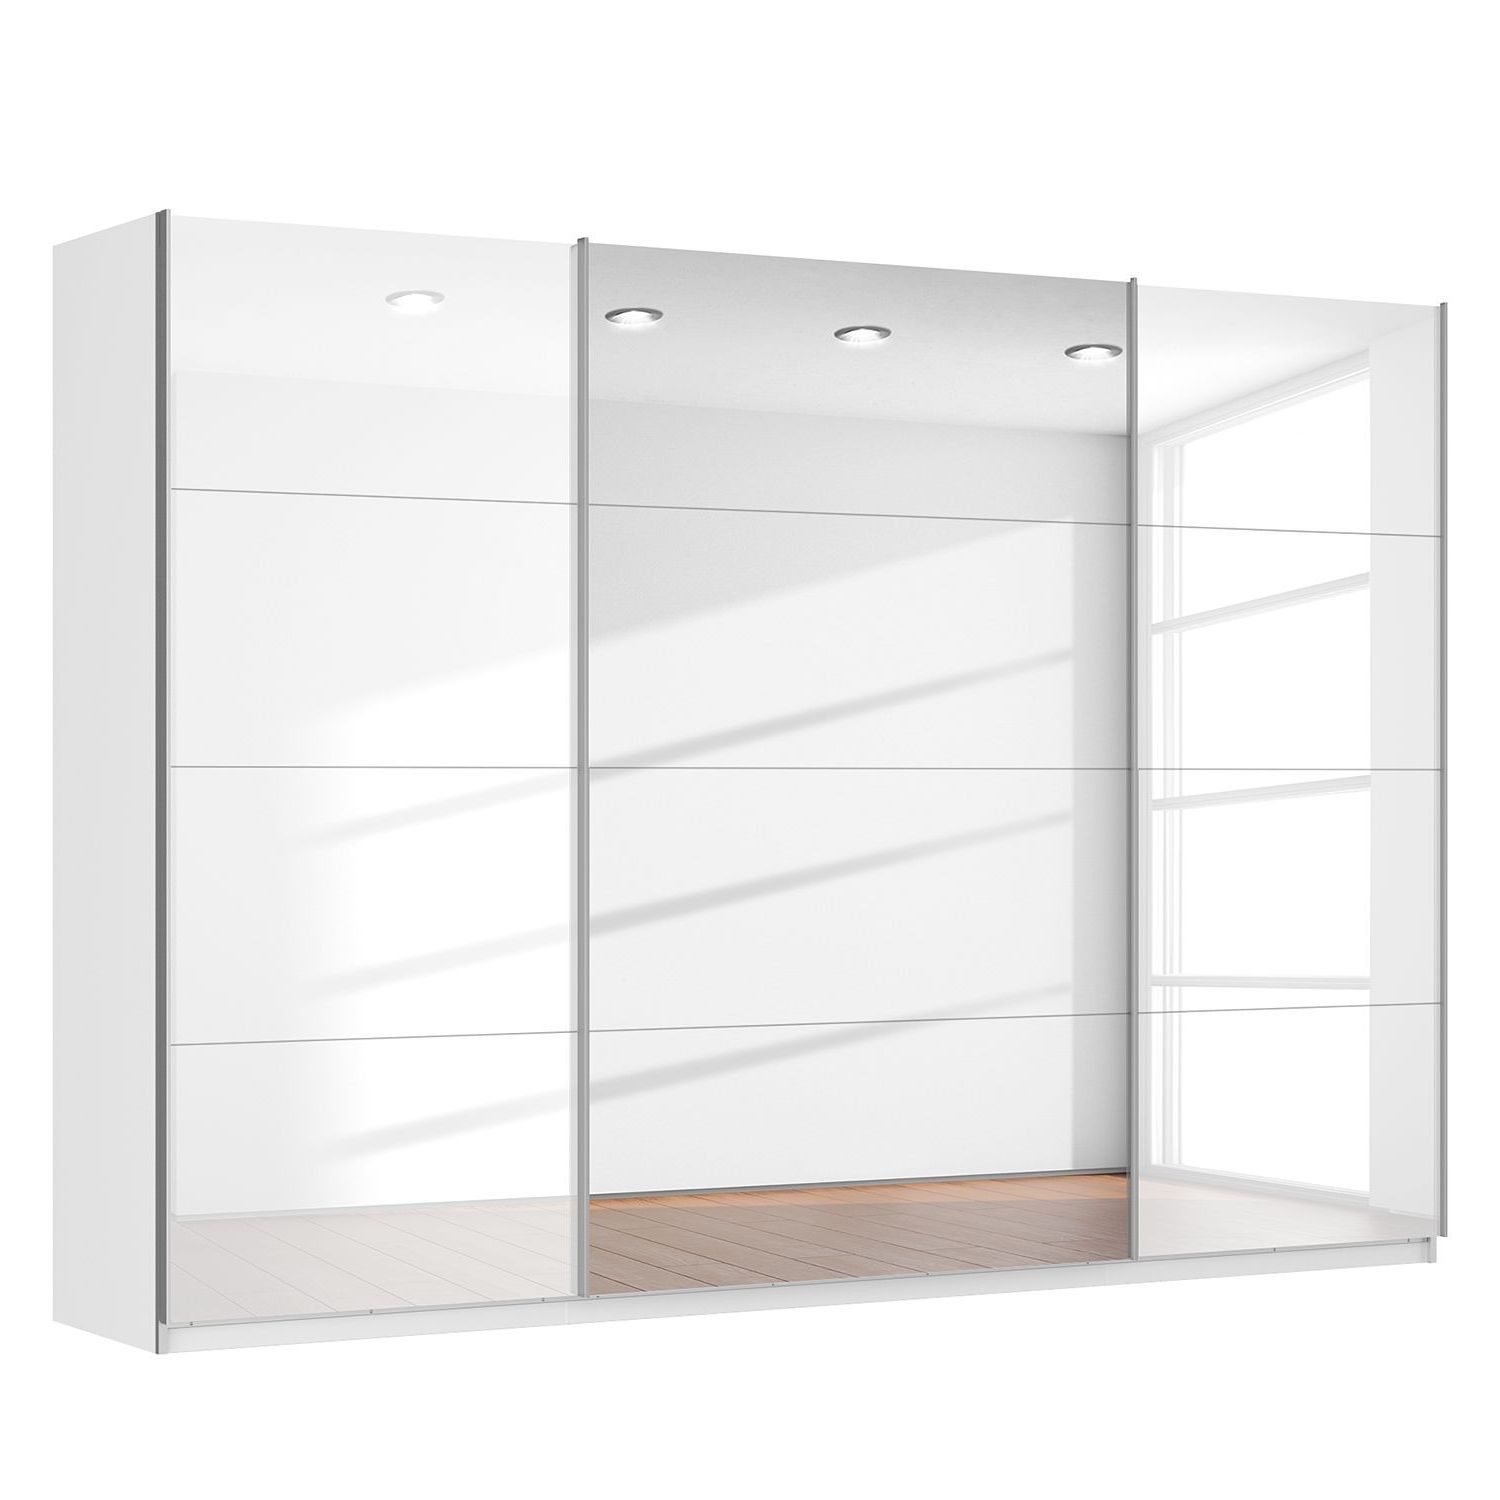 White Gloss Sliding Wardrobes Pertaining To Most Popular Rita Sliding Door Wardrobe High Gloss White With Centre Mirror (View 2 of 15)